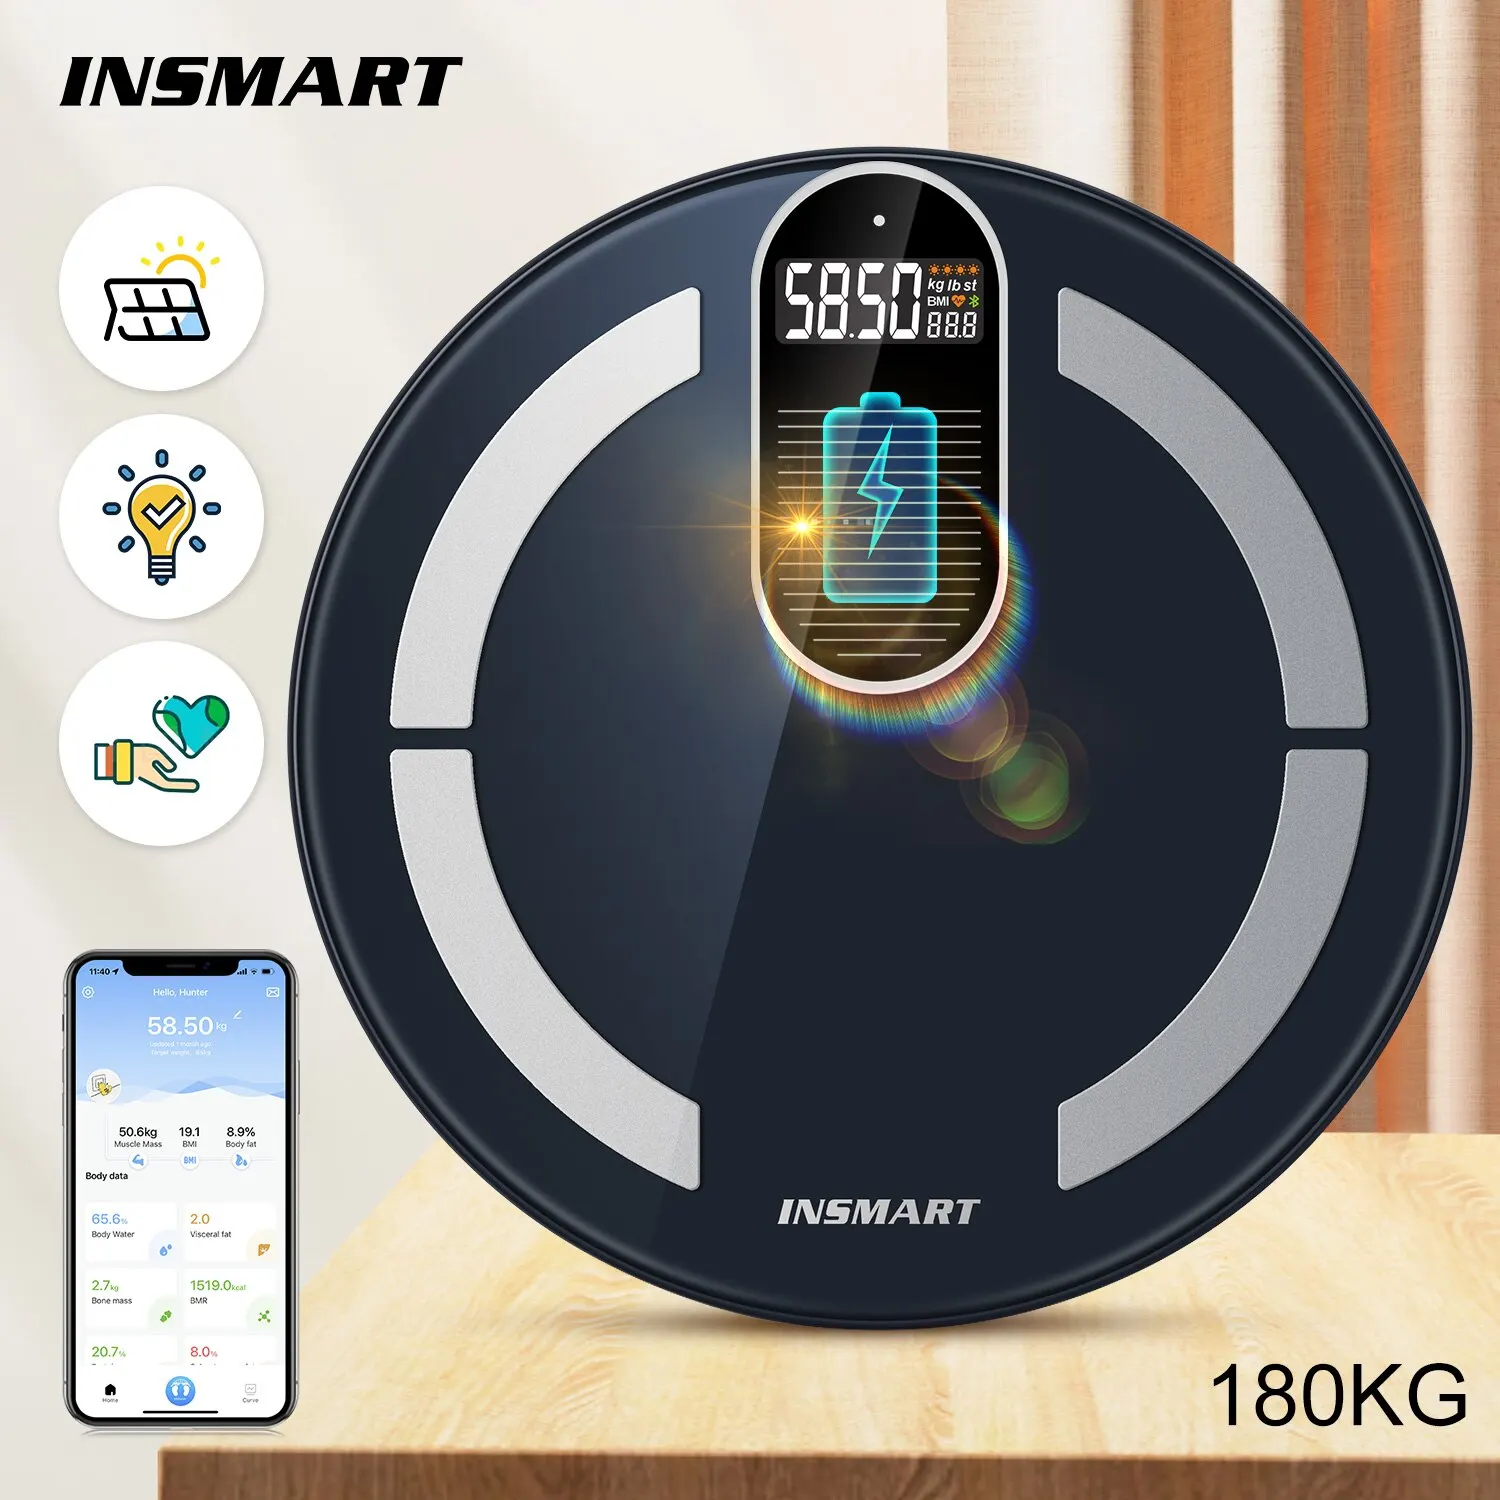 Insmart Smart Body Fat Scale Digital Scale For Body Weight Balance Wireless  Bathroom Scales Floor Composition Analyzer Bluetooth - Scale - AliExpress